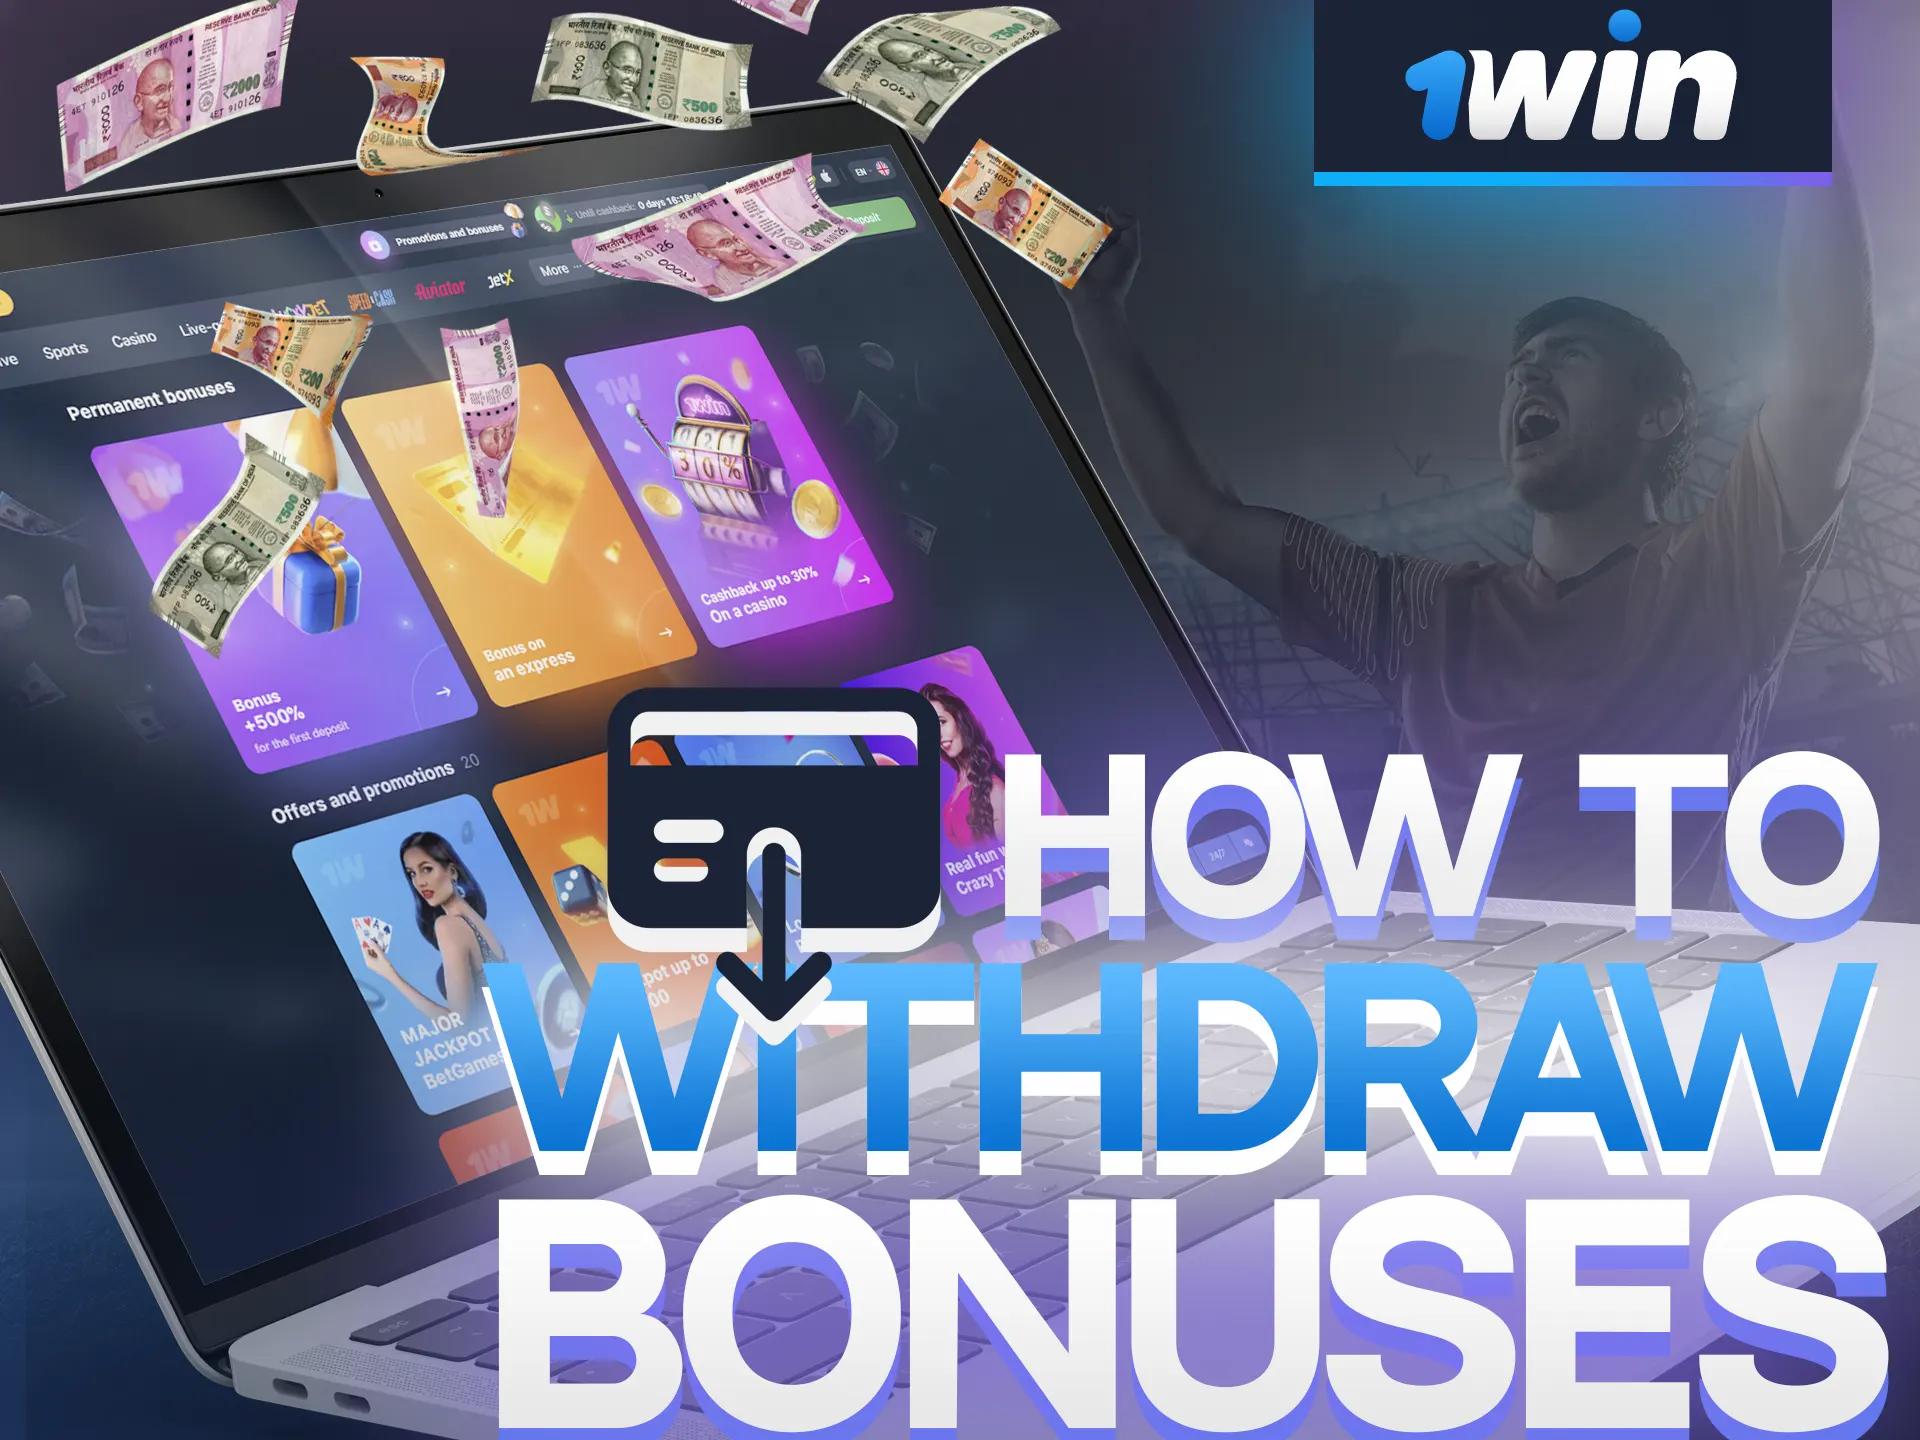 Withdraw bonus money faster with these instructions 1Win.